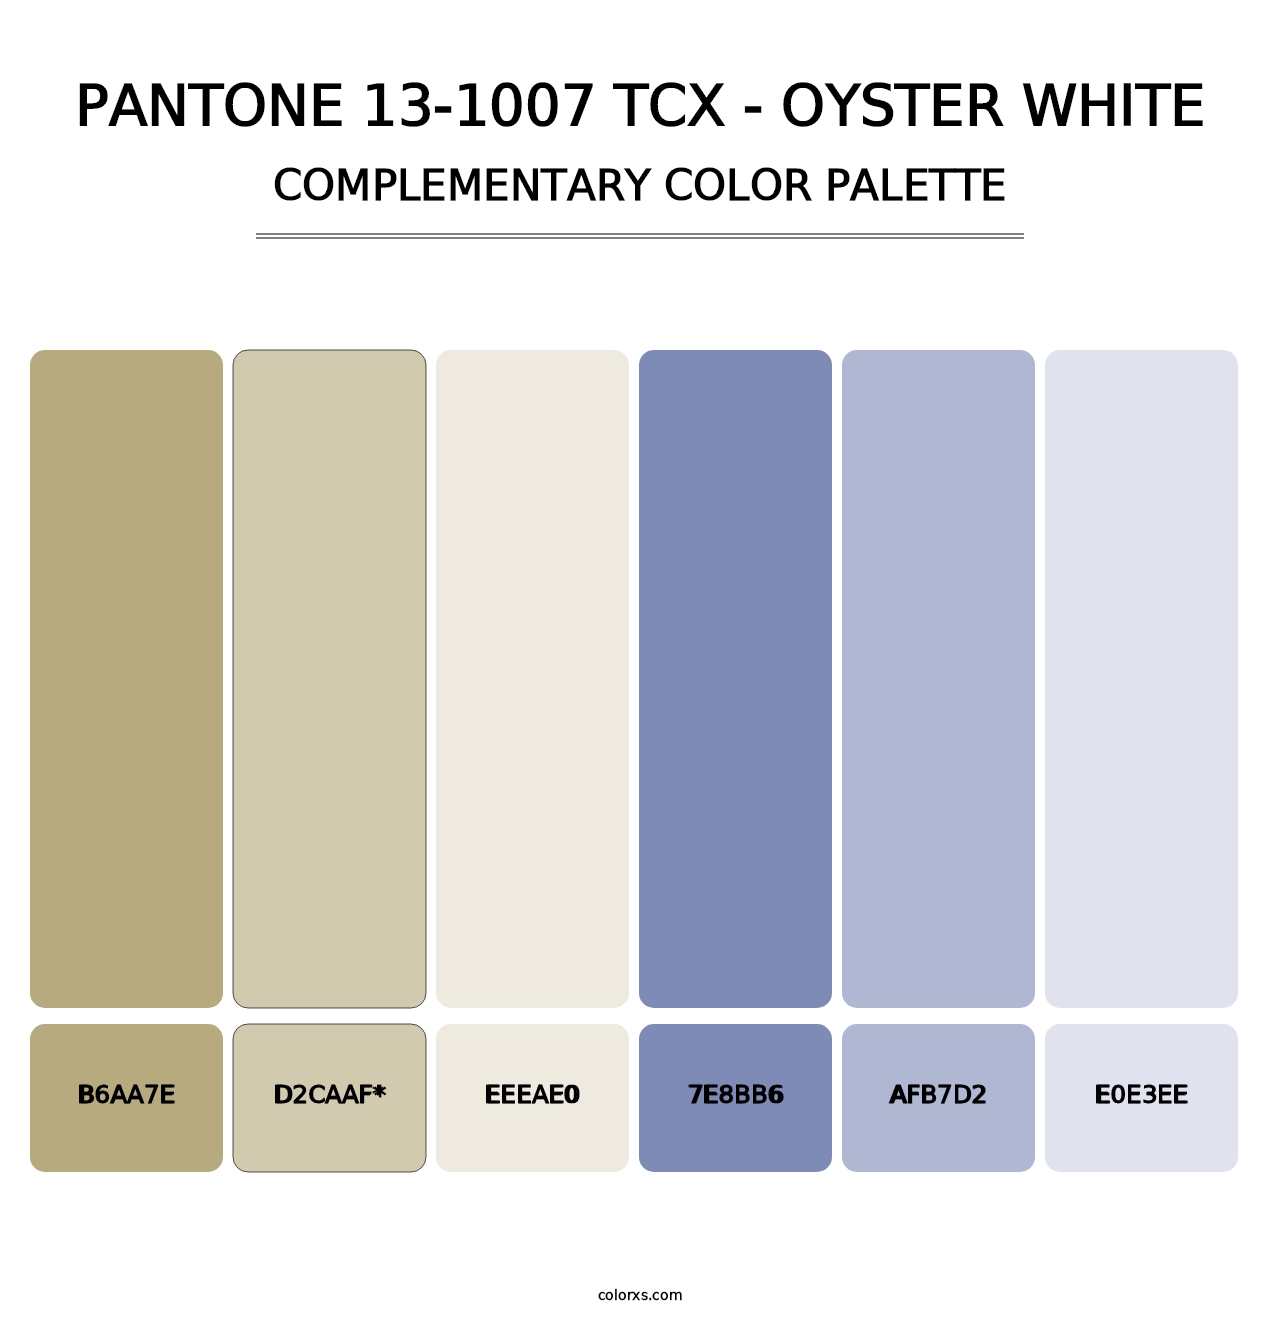 PANTONE 13-1007 TCX - Oyster White - Complementary Color Palette